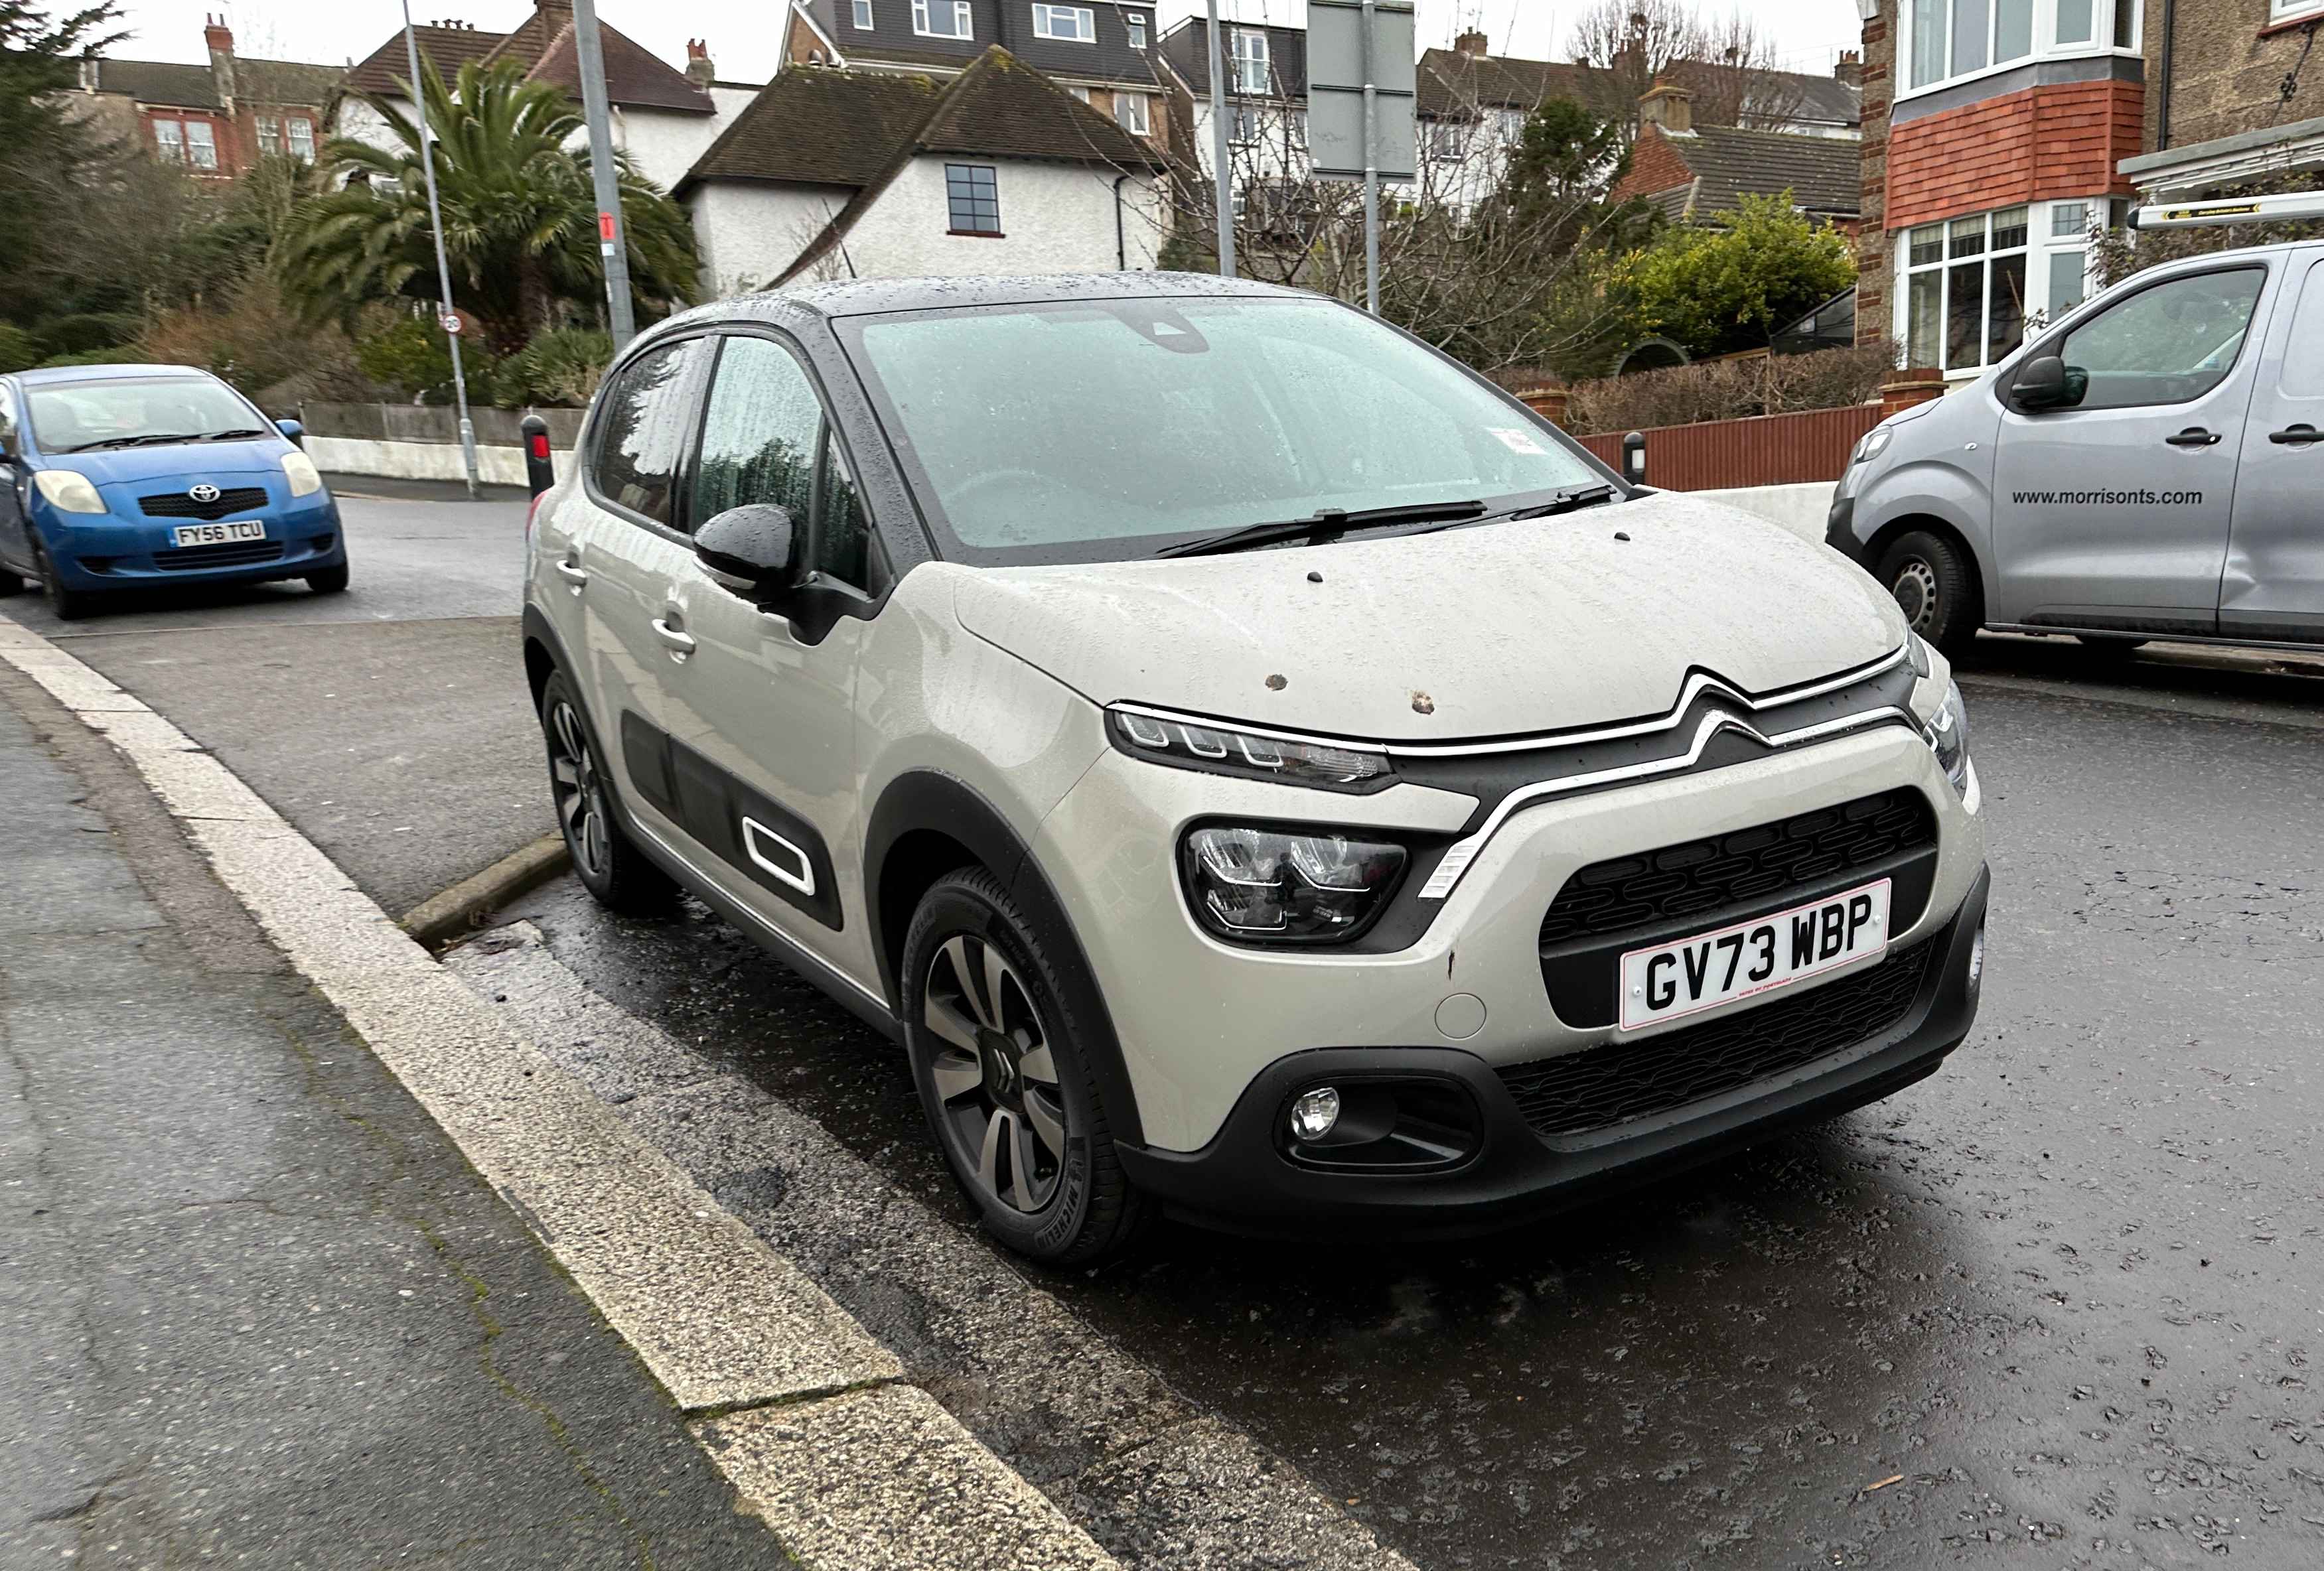 Photograph of GV73 WBP - a Grey Citroen C3 parked in Hollingdean by a non-resident who uses the local area as part of their Brighton commute. The second of four photographs supplied by the residents of Hollingdean.